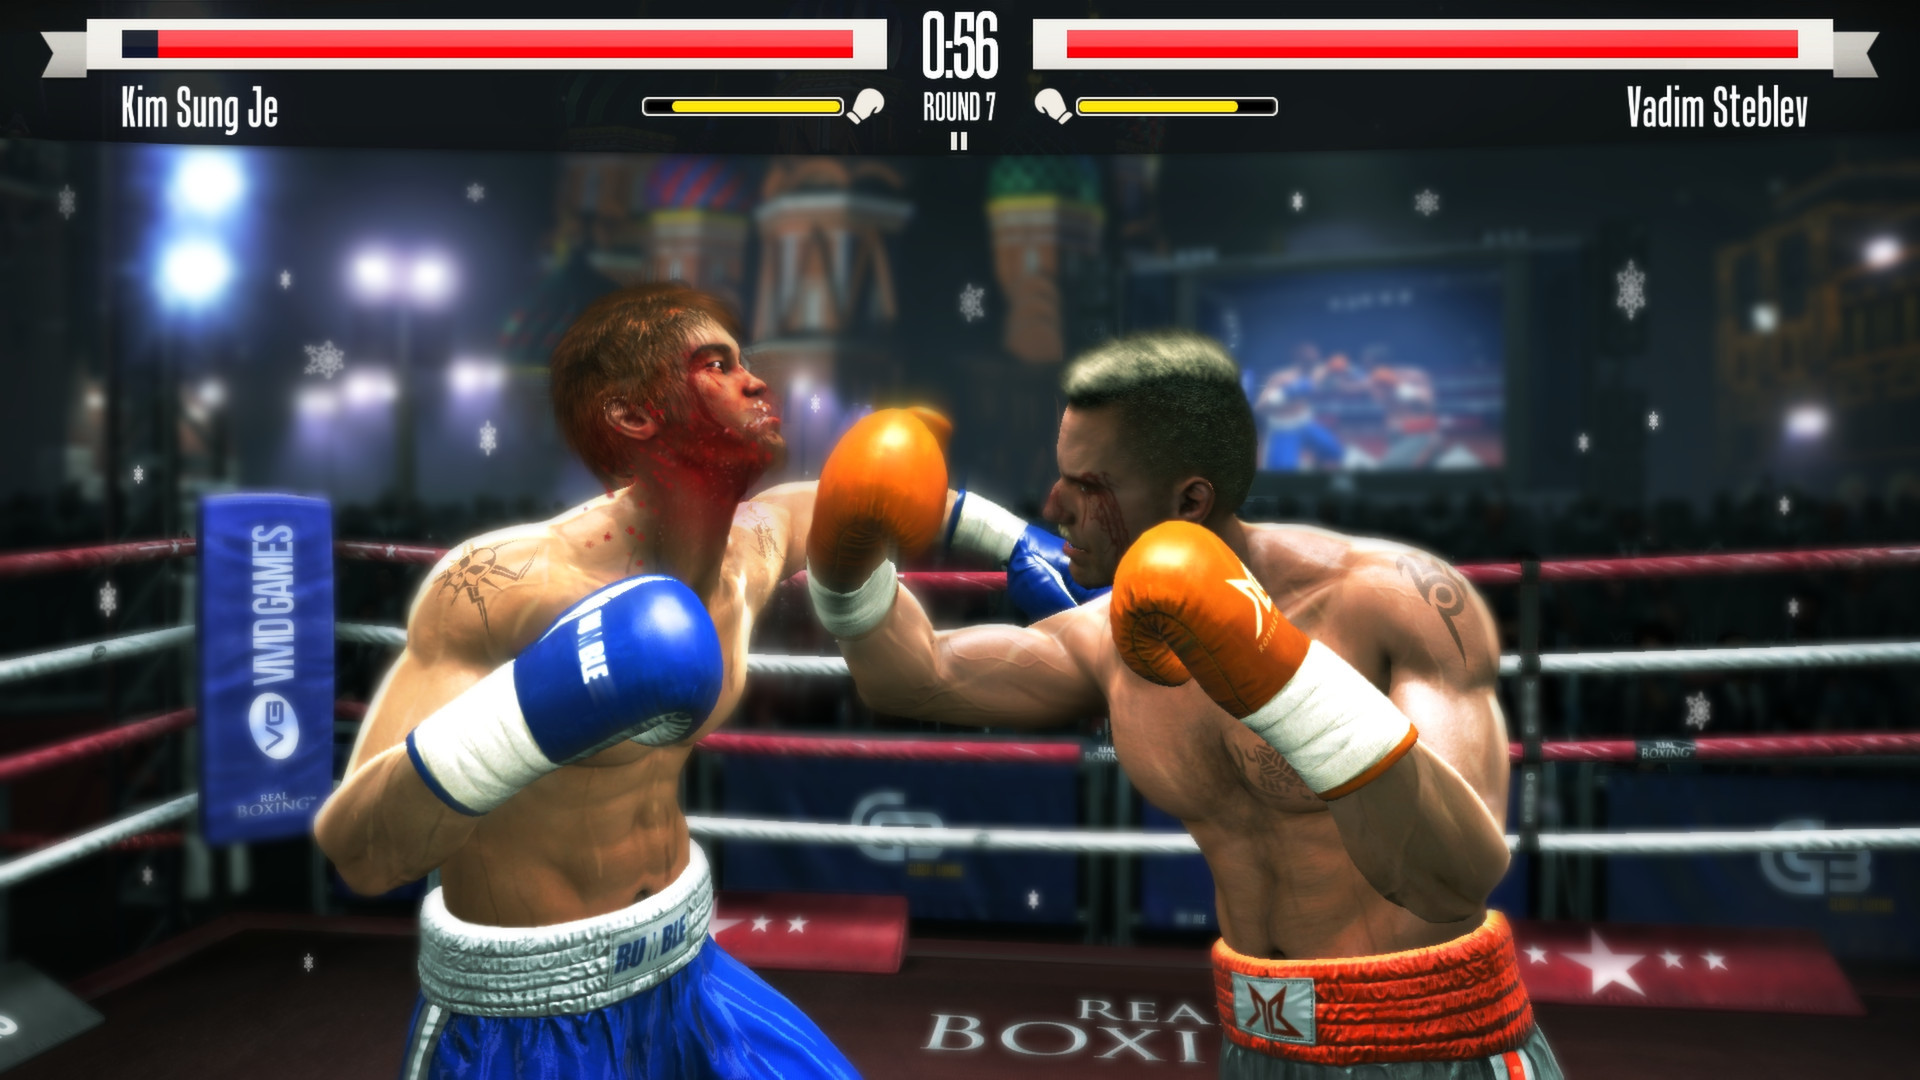 real boxing android game